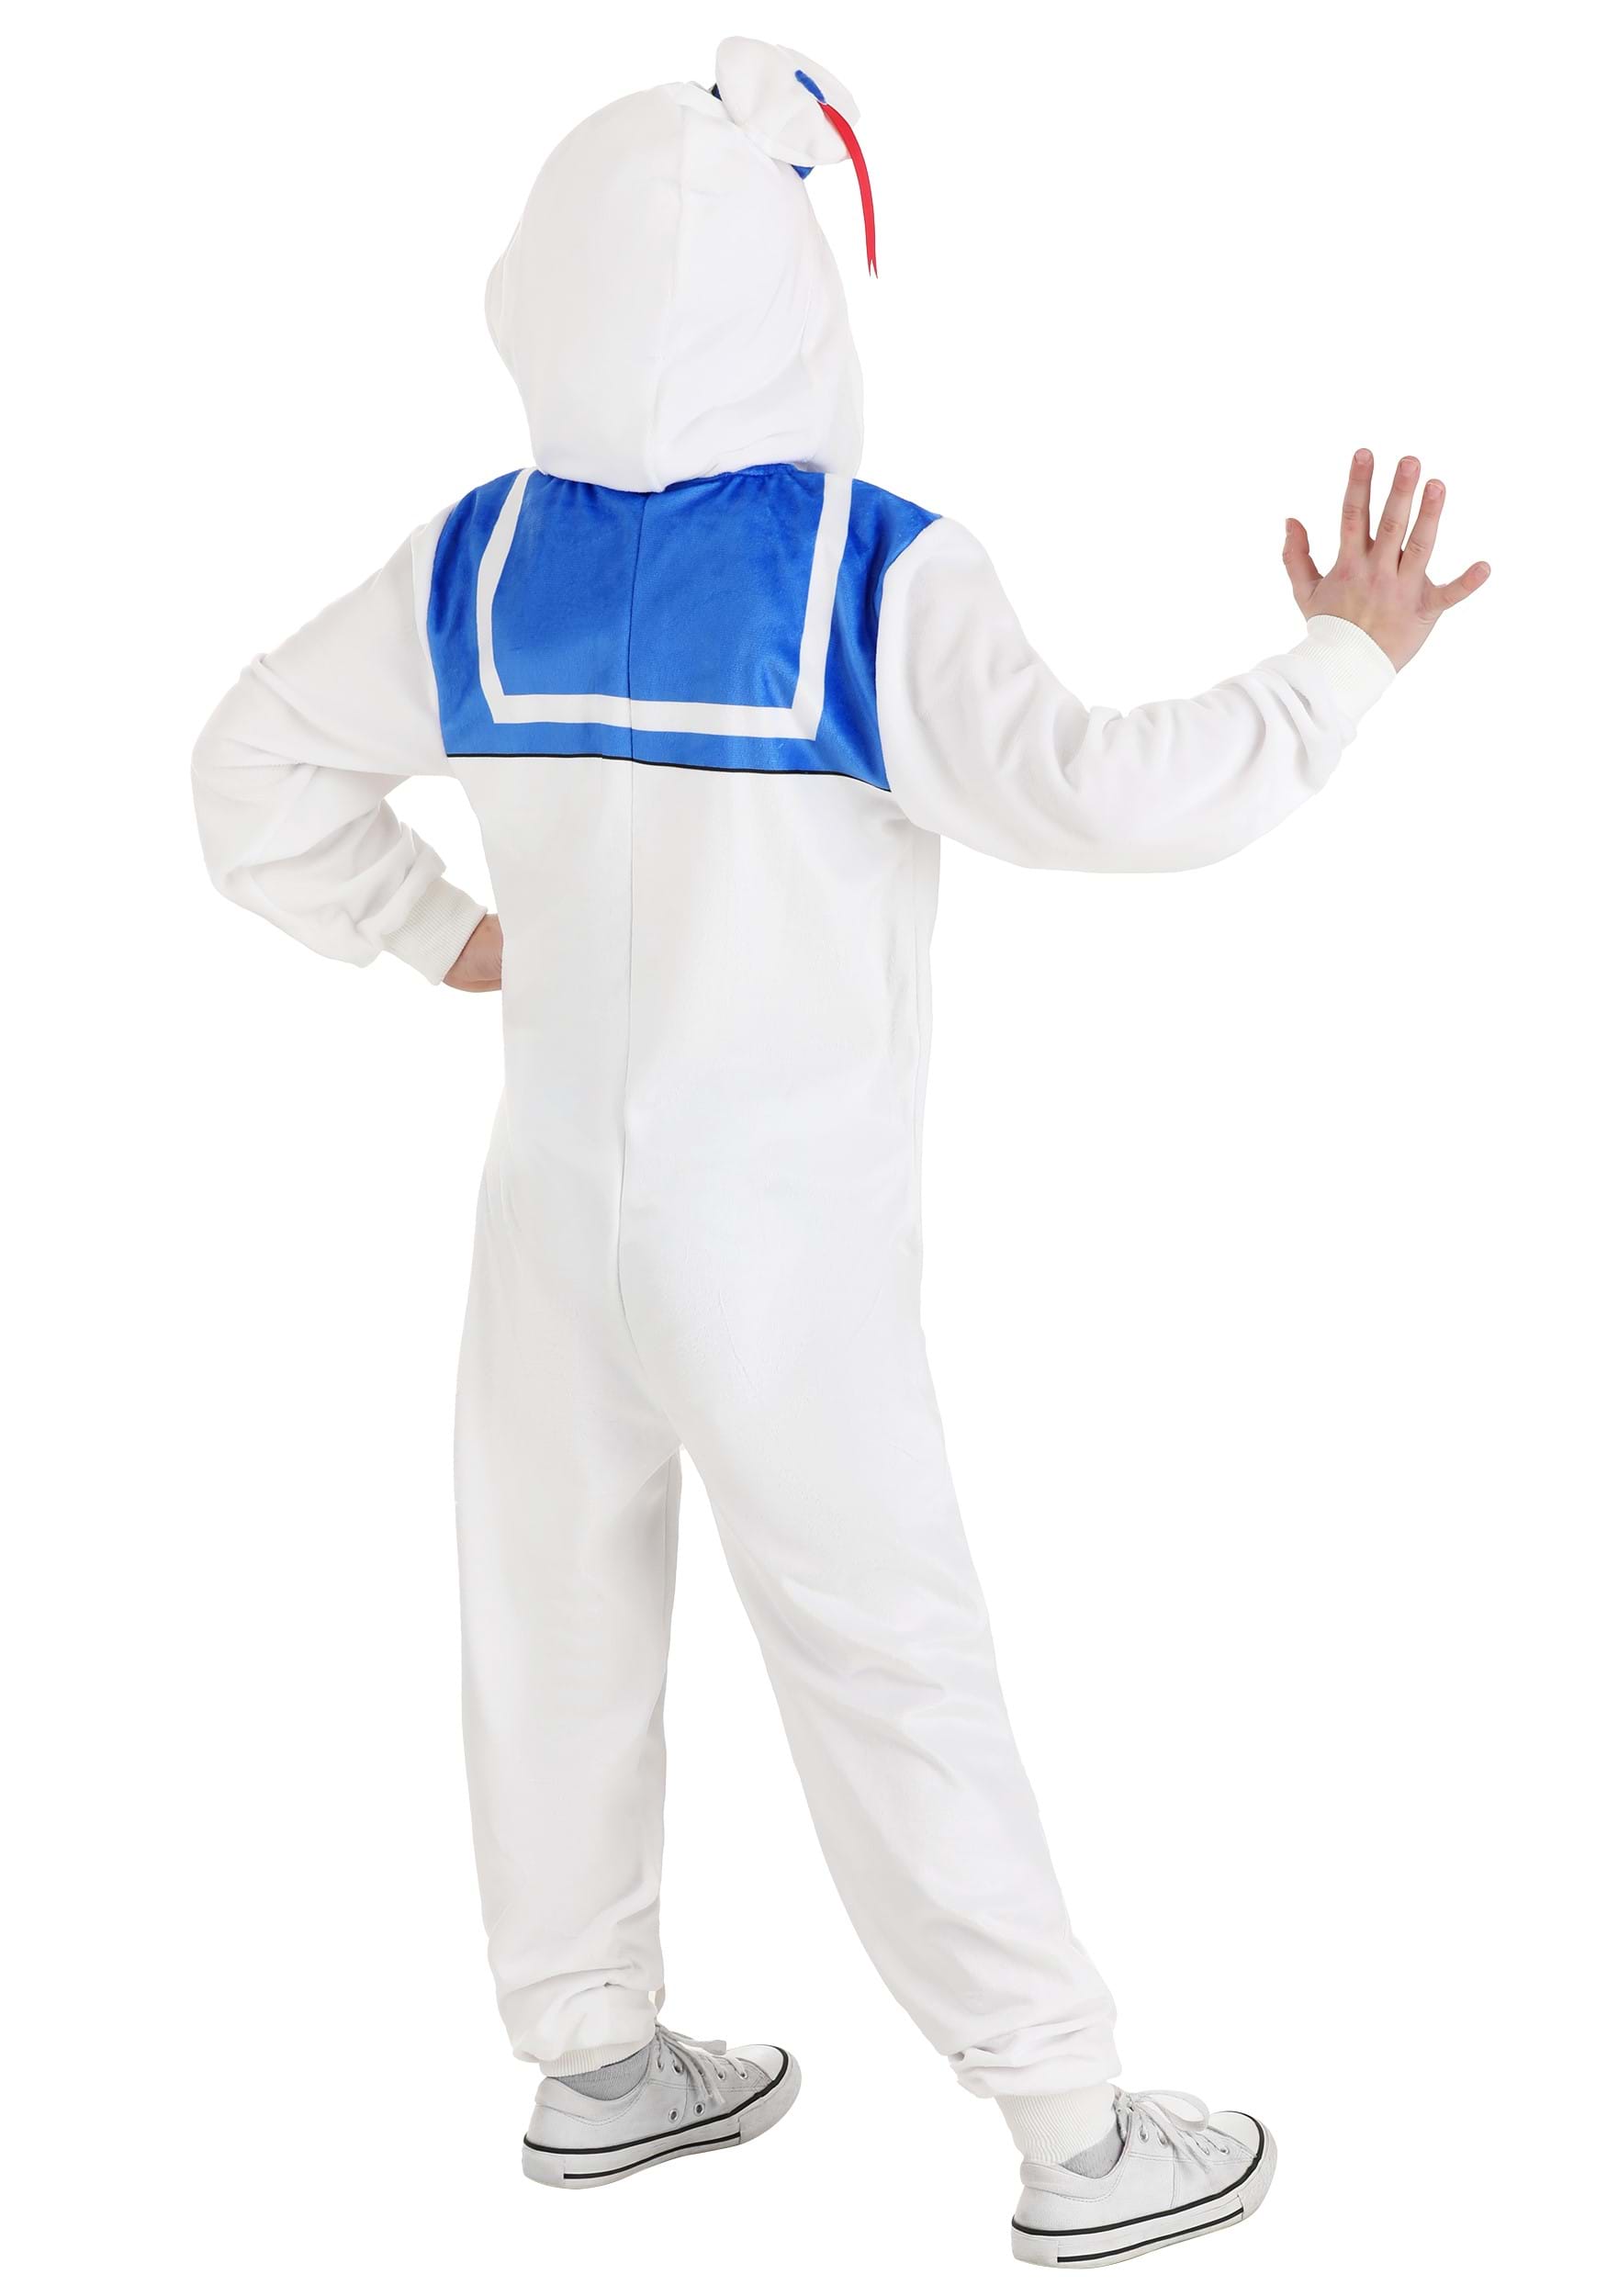 Stay Puft Marshmallow Man Costume Onesie for Kids